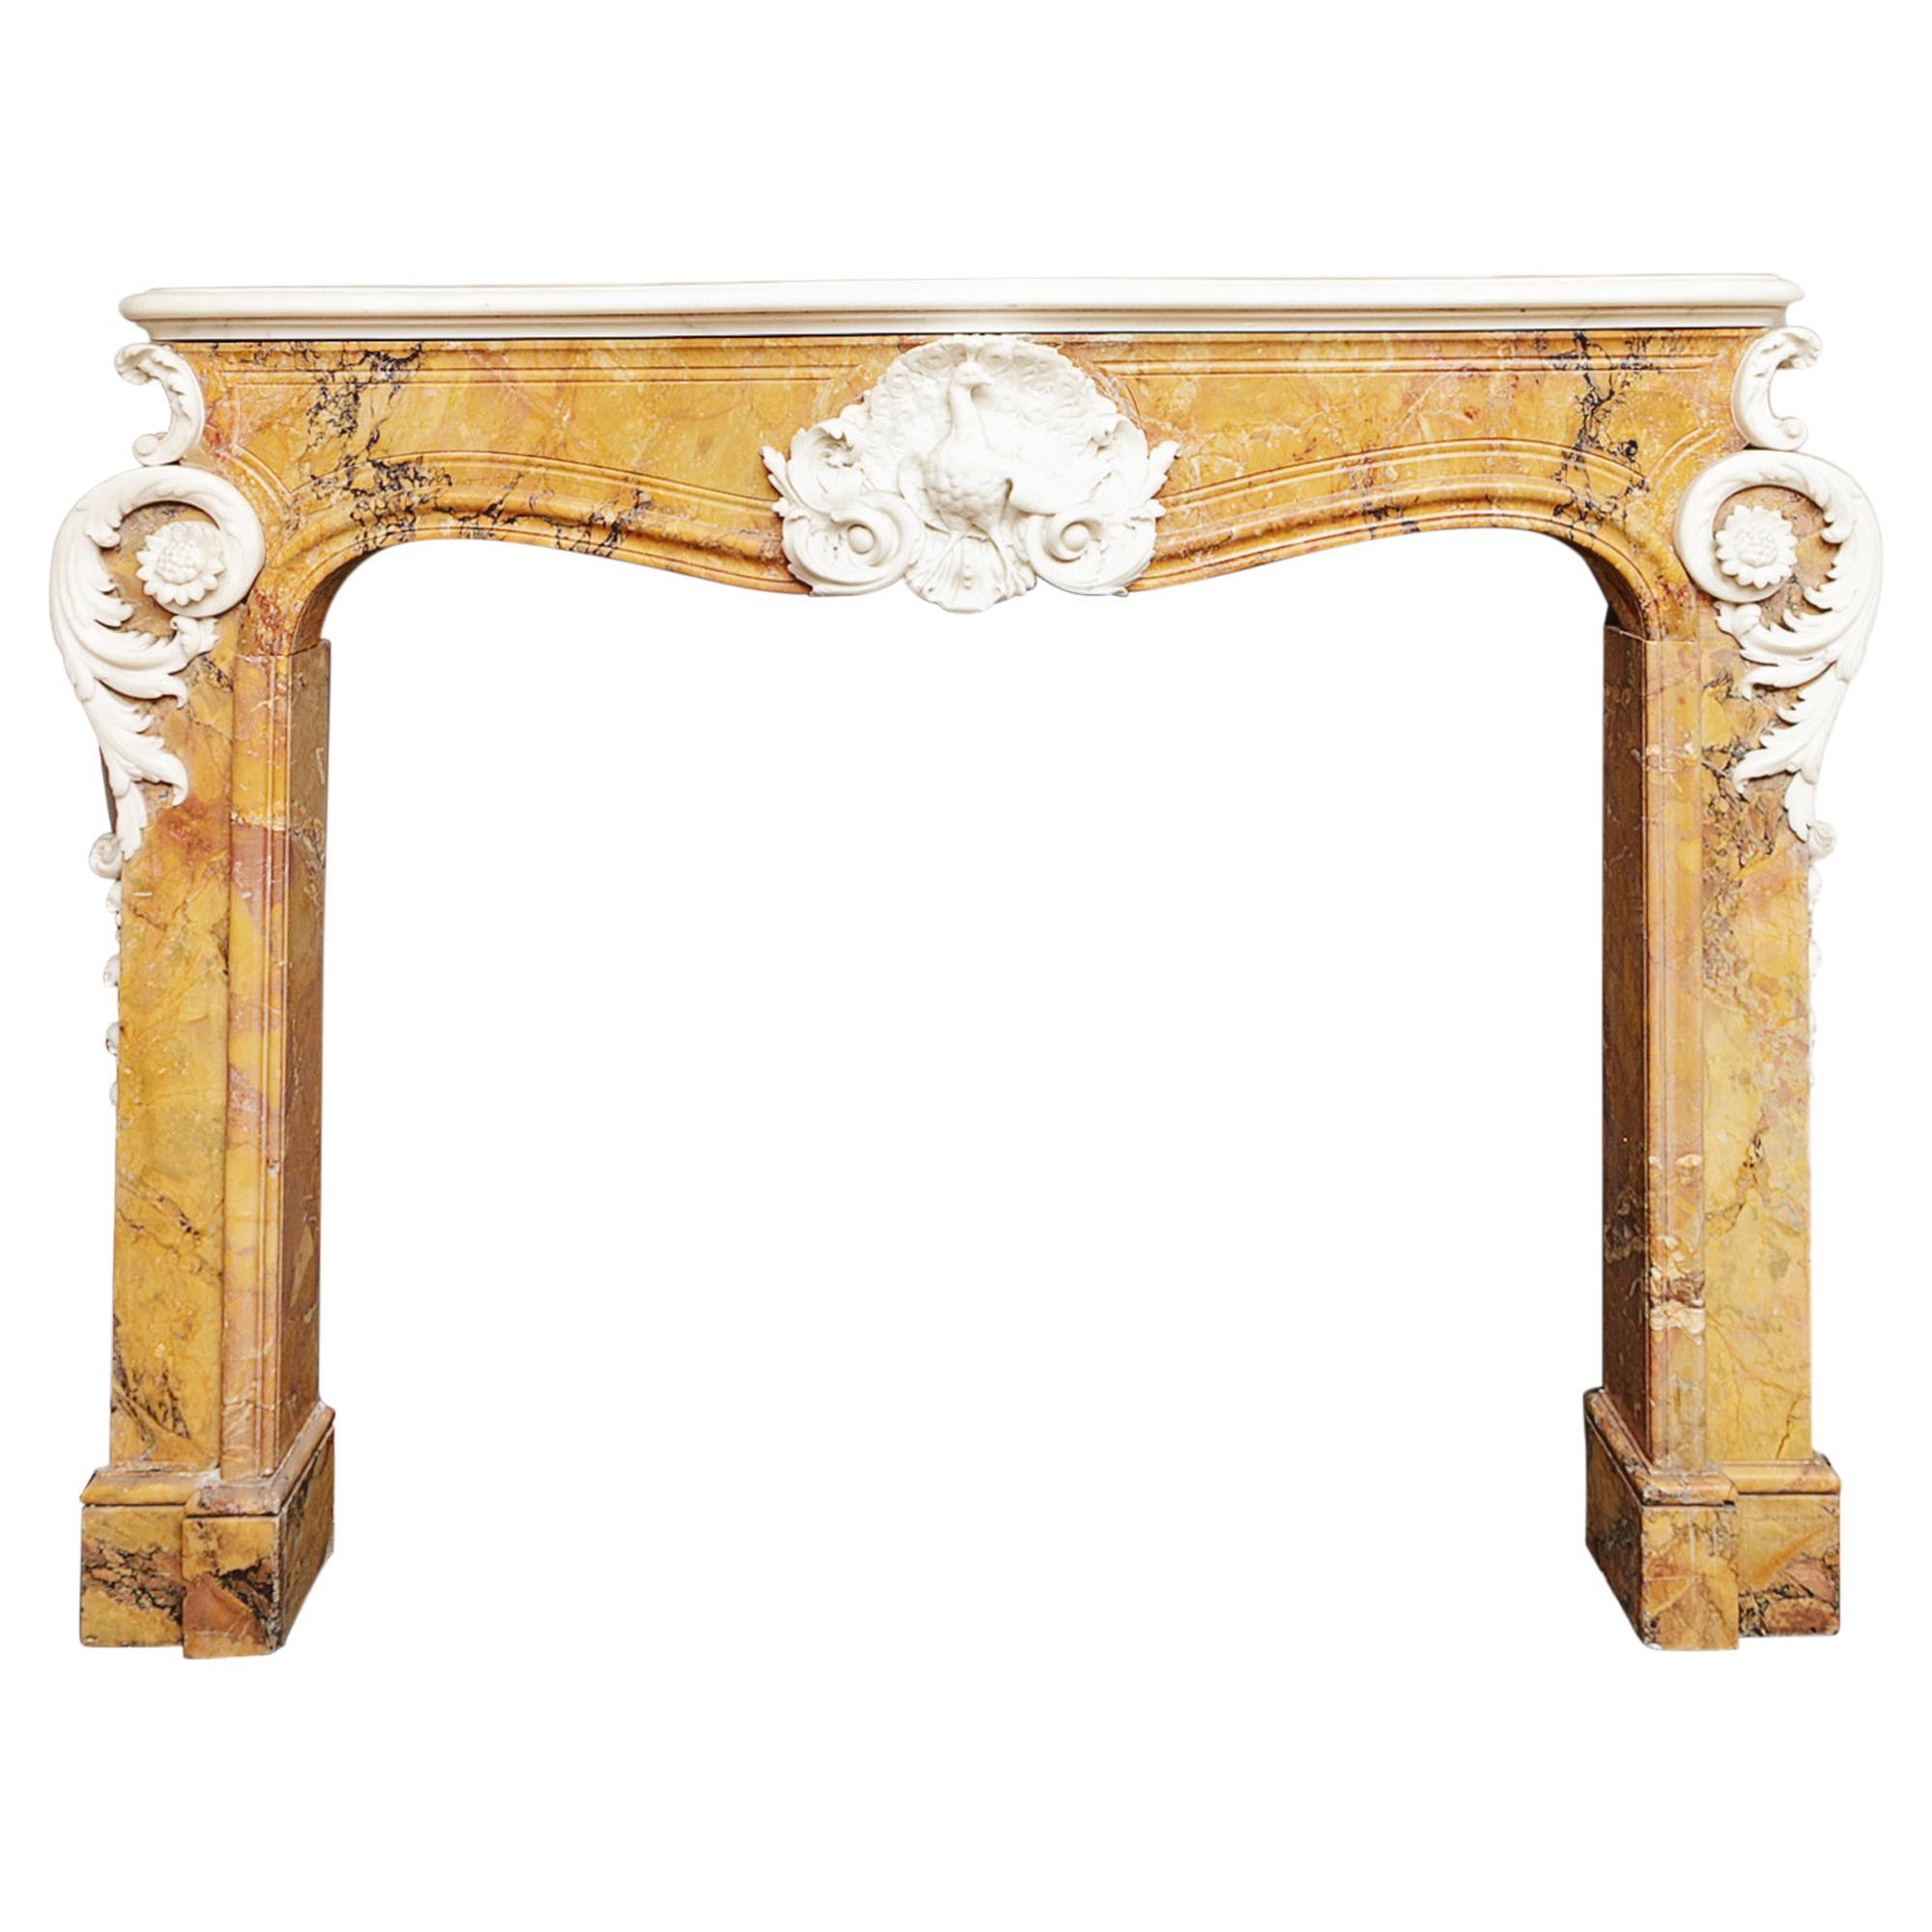 18th Century George II Sienna and White Statuary Marble Fire Surround For Sale